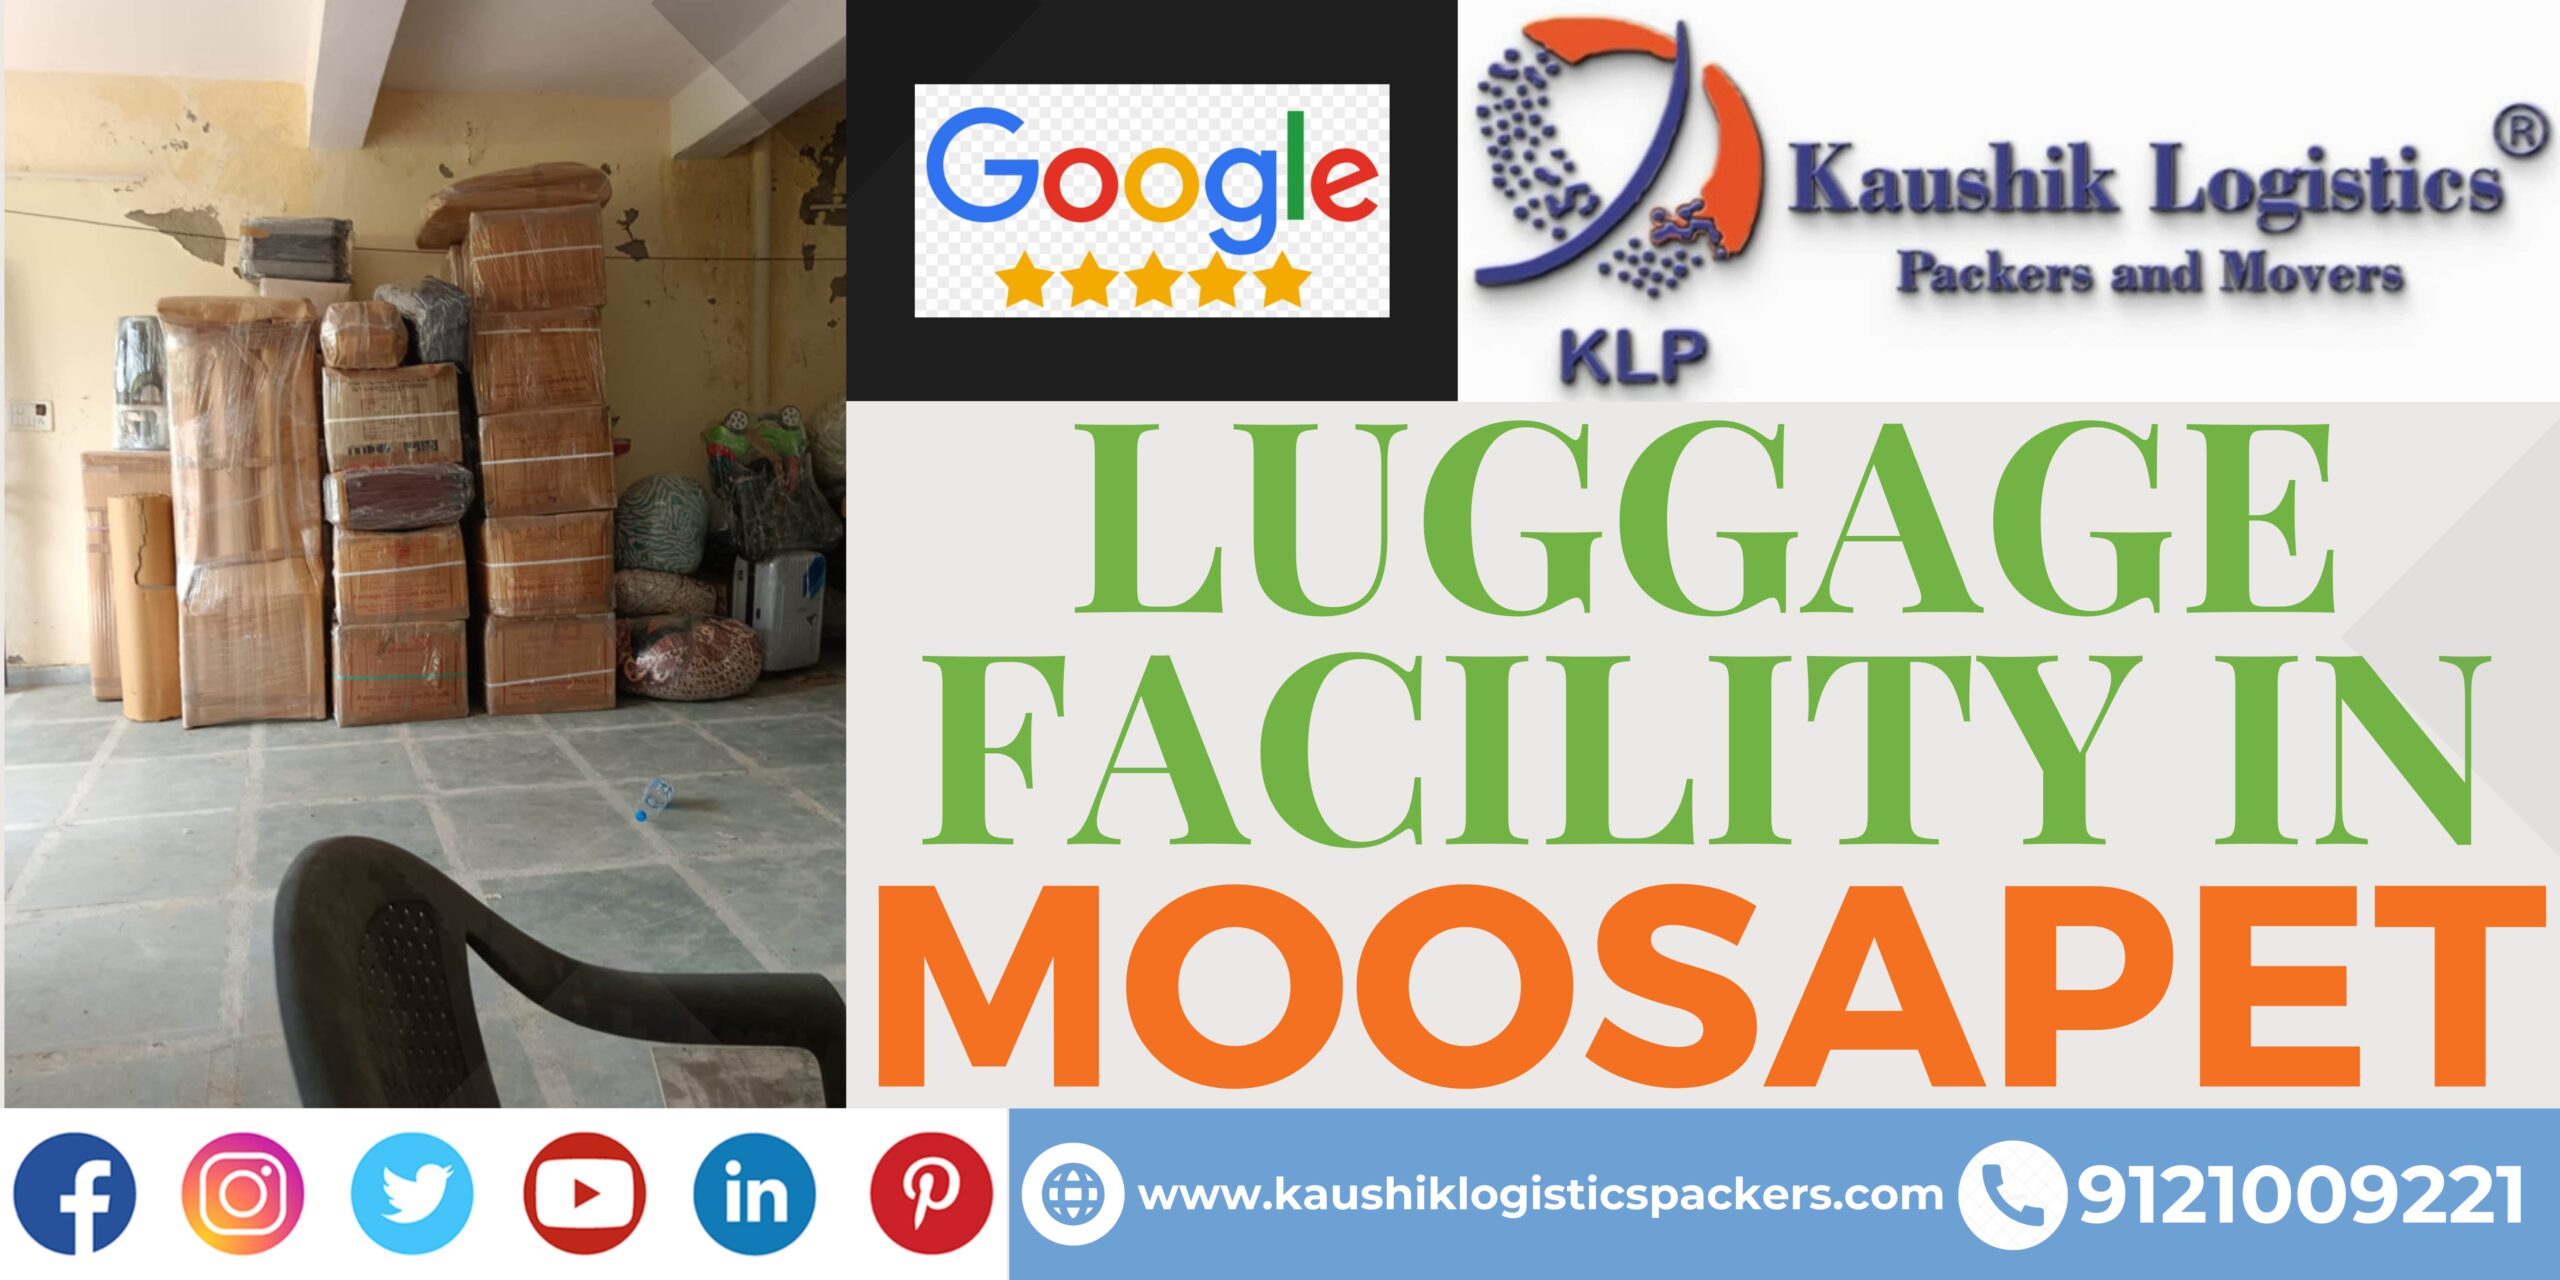 Packers and Movers In Moosapet